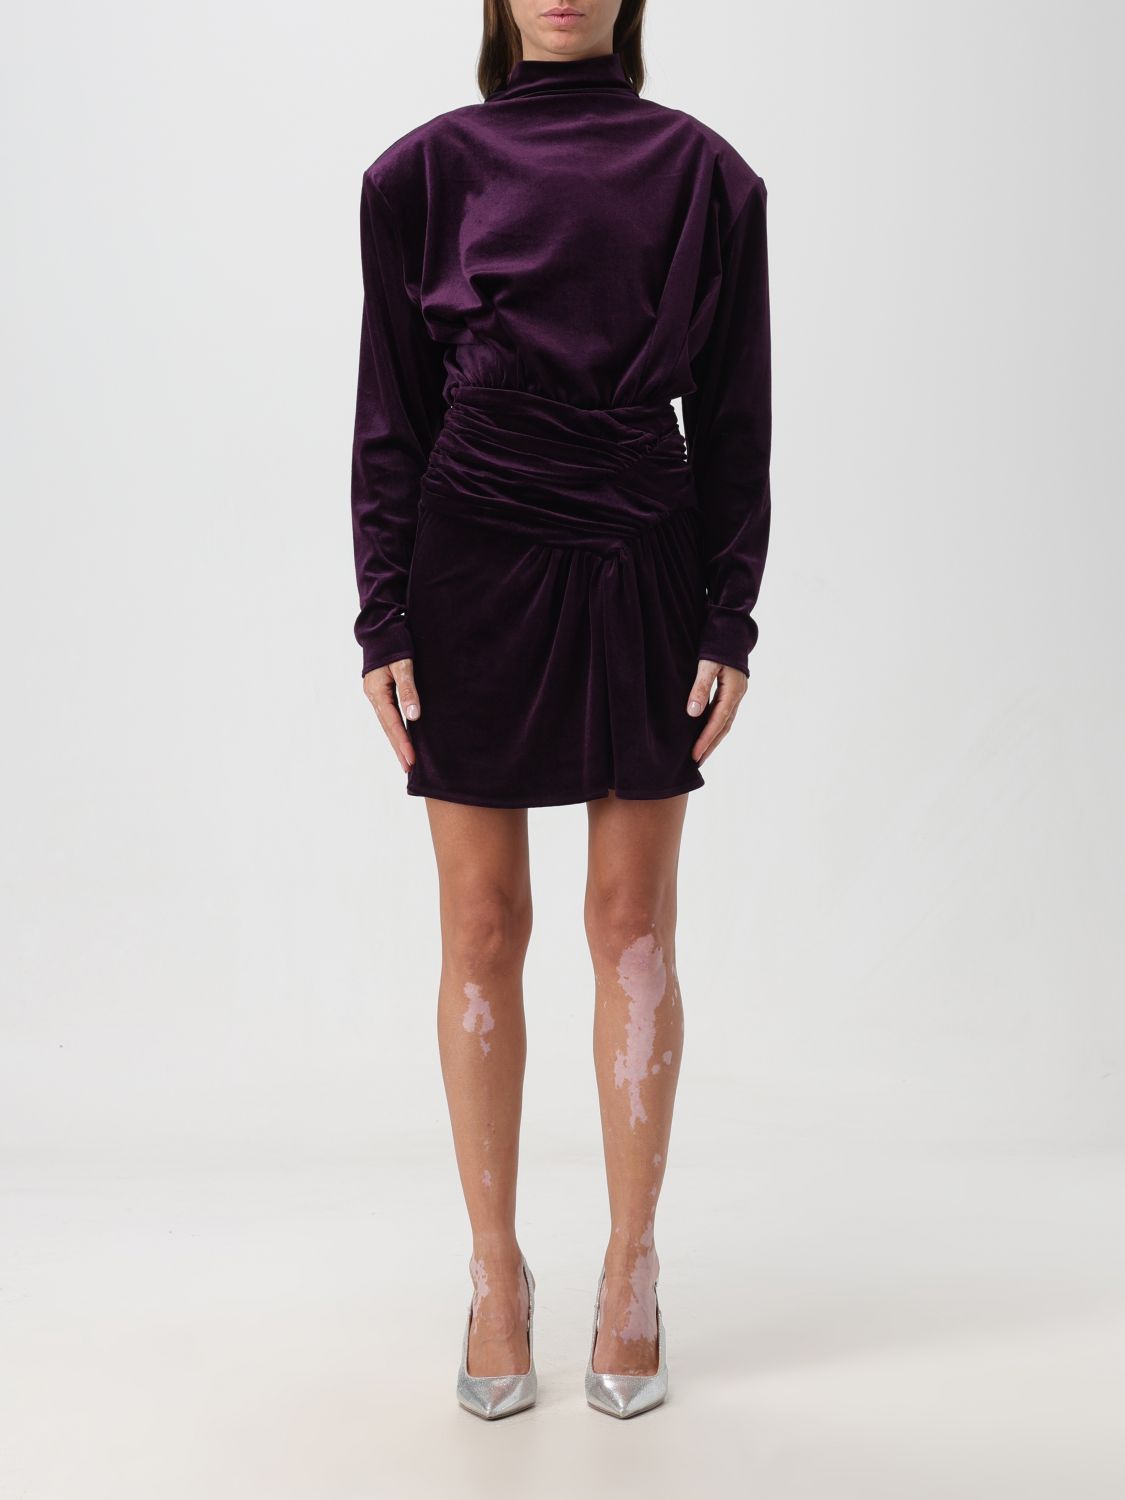 New Arrivals Dress  Woman In Violet